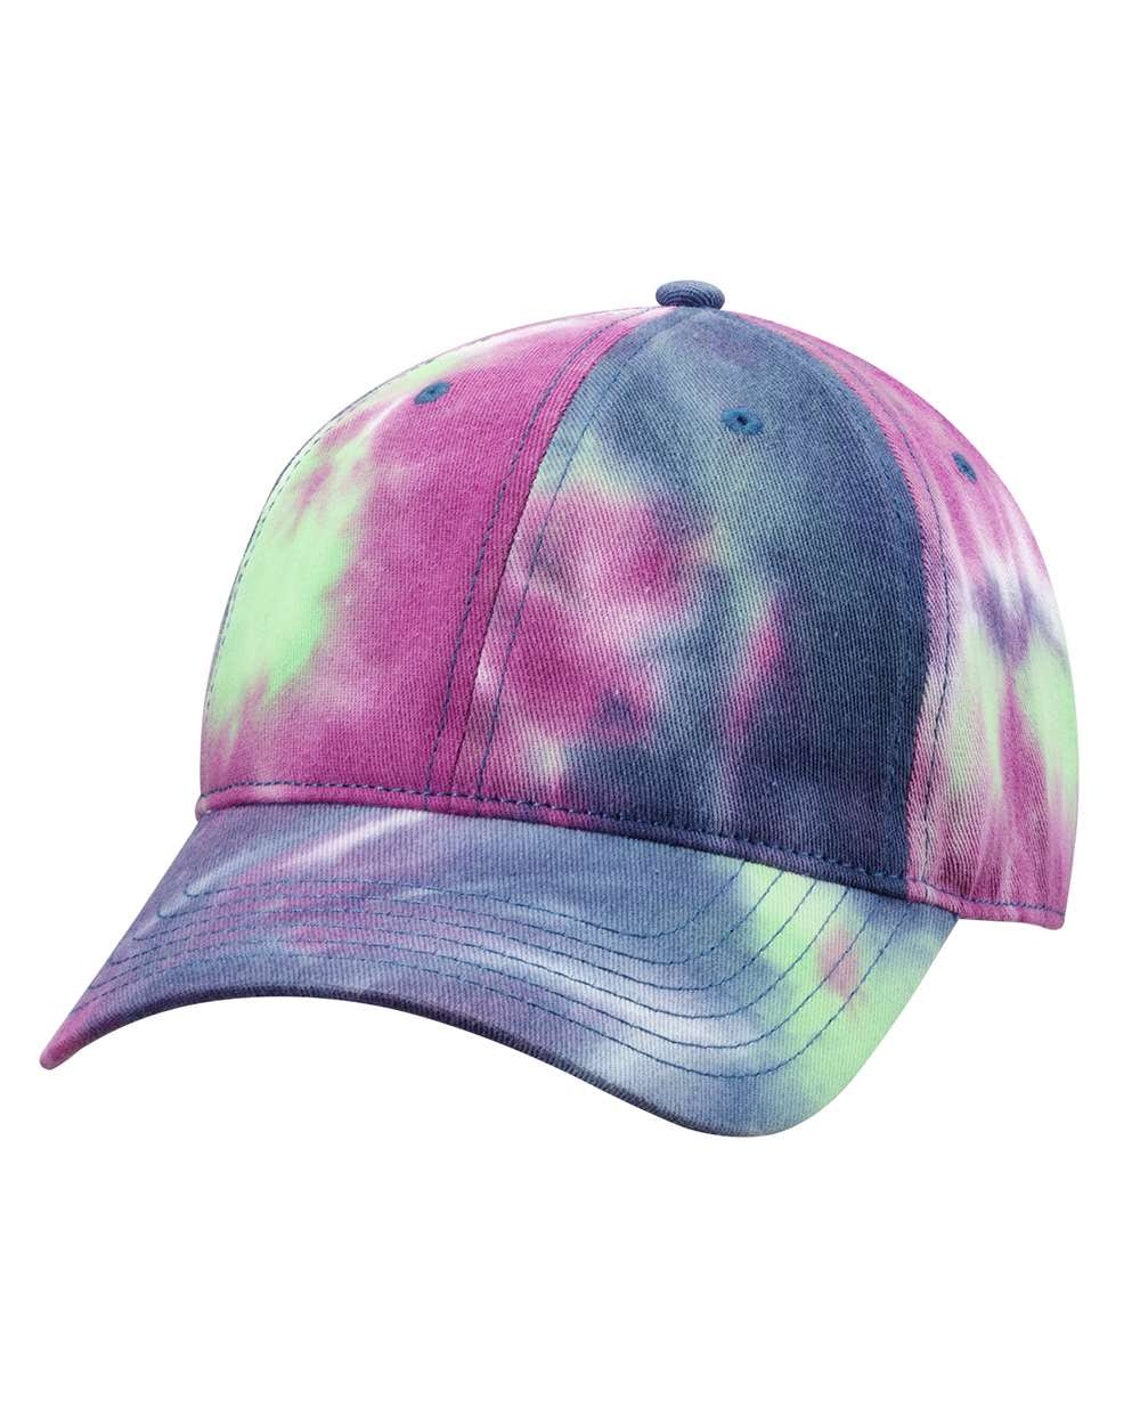 Purple Passion Tie Dyed Baseball Cap Baseball Hat Gift For | Etsy